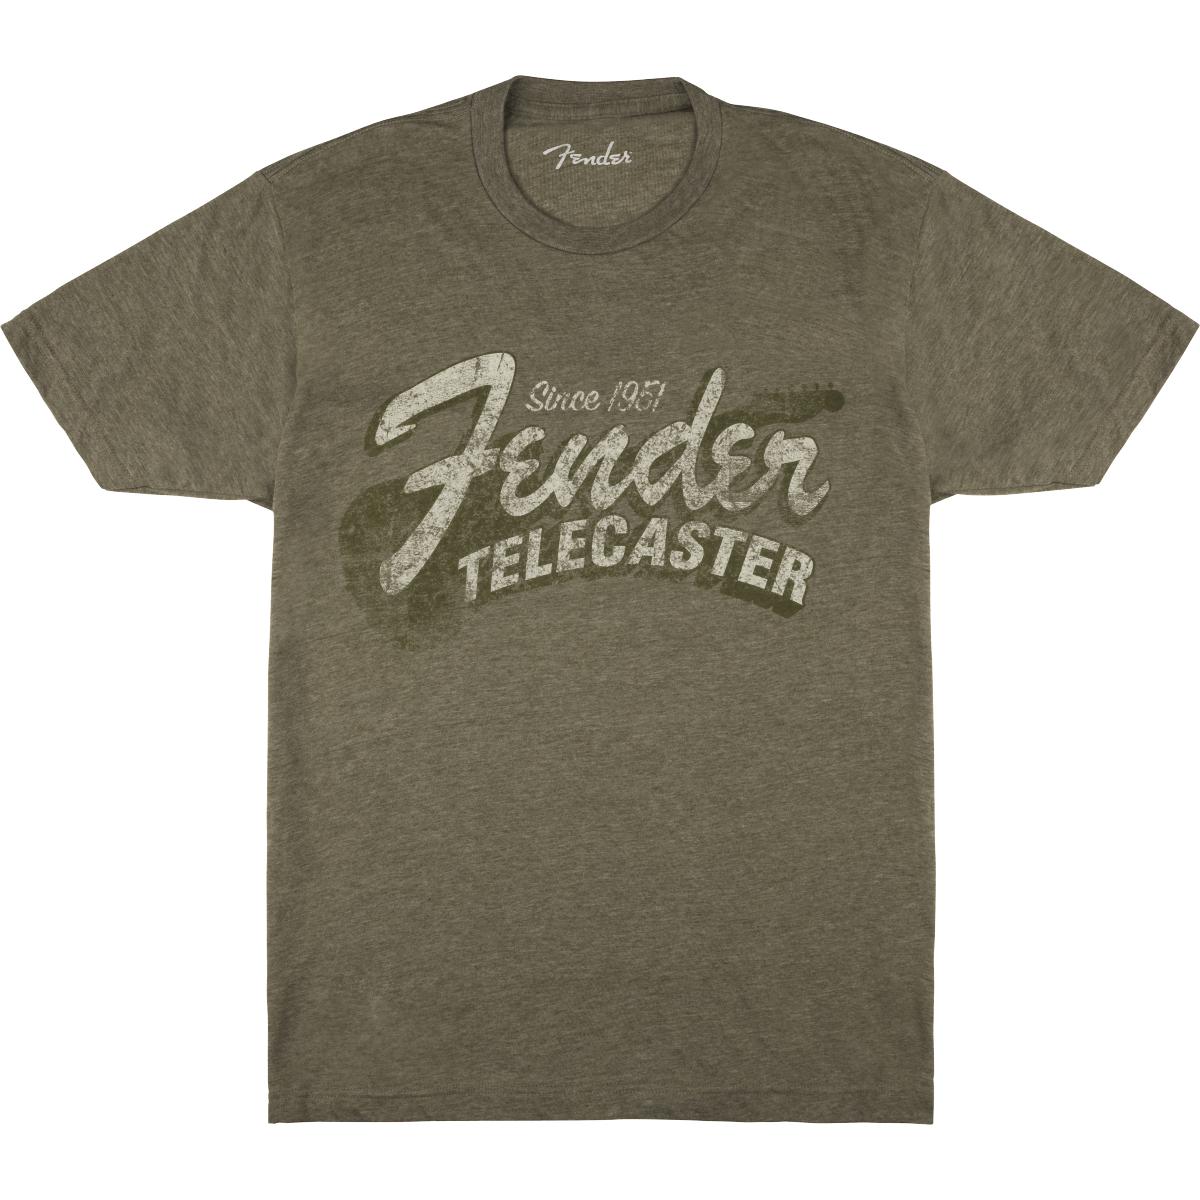 Fender® Since 1951 Telecaster™ distressed graphic Cotton blend in heathered olive green 65% cotton/35% polyester Machine wash cold, tumble dry low Do not bleach, do not iron Sizes: Mens S-XXL